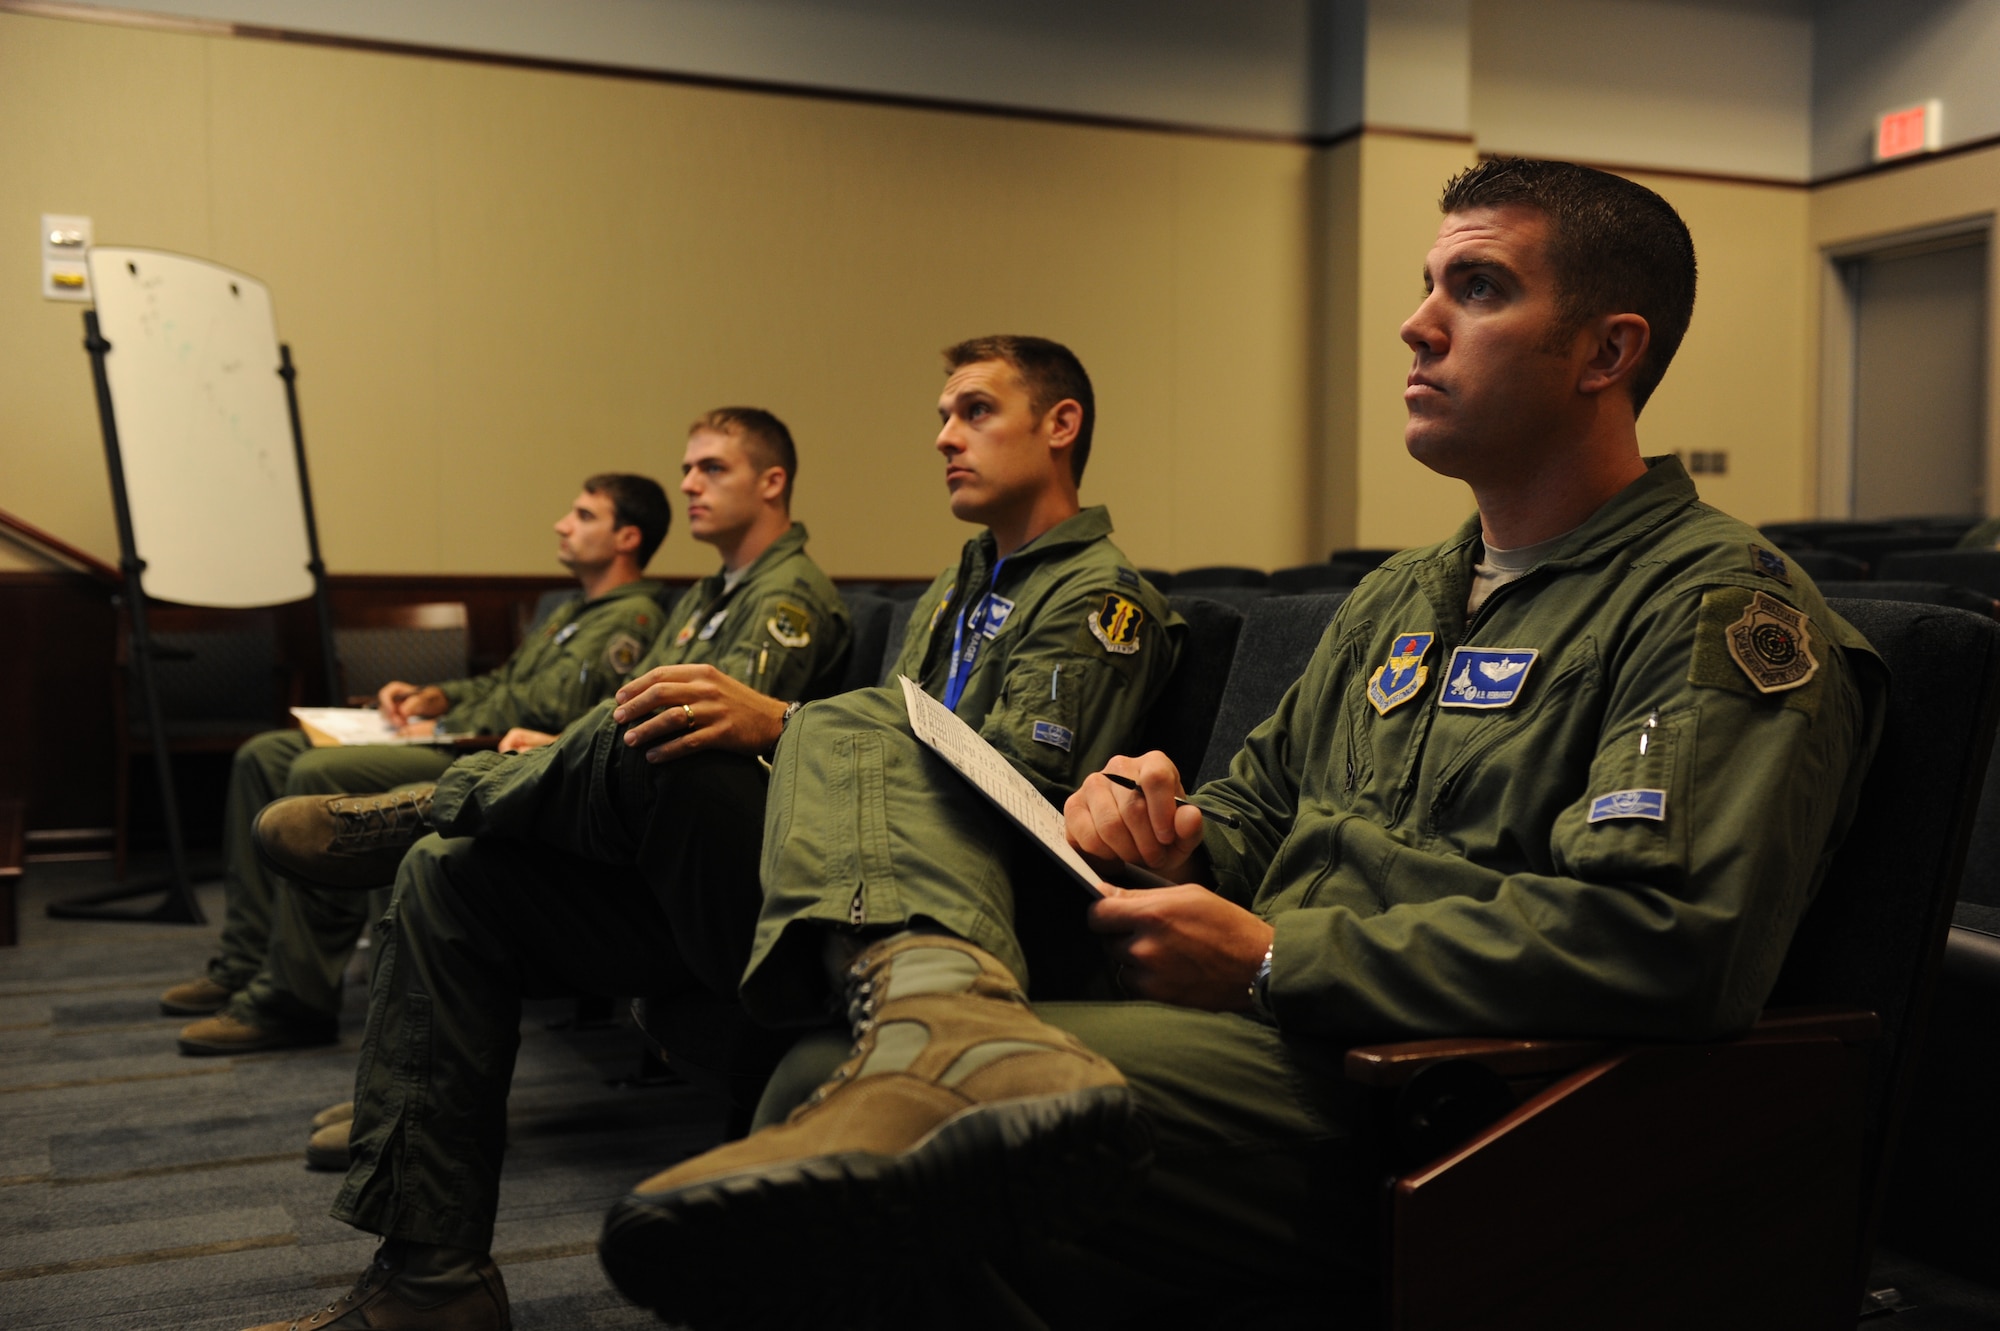 F-35A Lightning II and F-22 Raptor pilots listen to a preflight briefing before an integrated training mission on Eglin Air Force Base, Florida, Nov. 5, 2014. The F-35s and F-22s flew offensive counter air, defensive counter air and interdiction missions together, employing tactics to maximize their fifth-generation capabilities. (U.S. Air Force photo/Staff Sgt. Marleah Robertson)